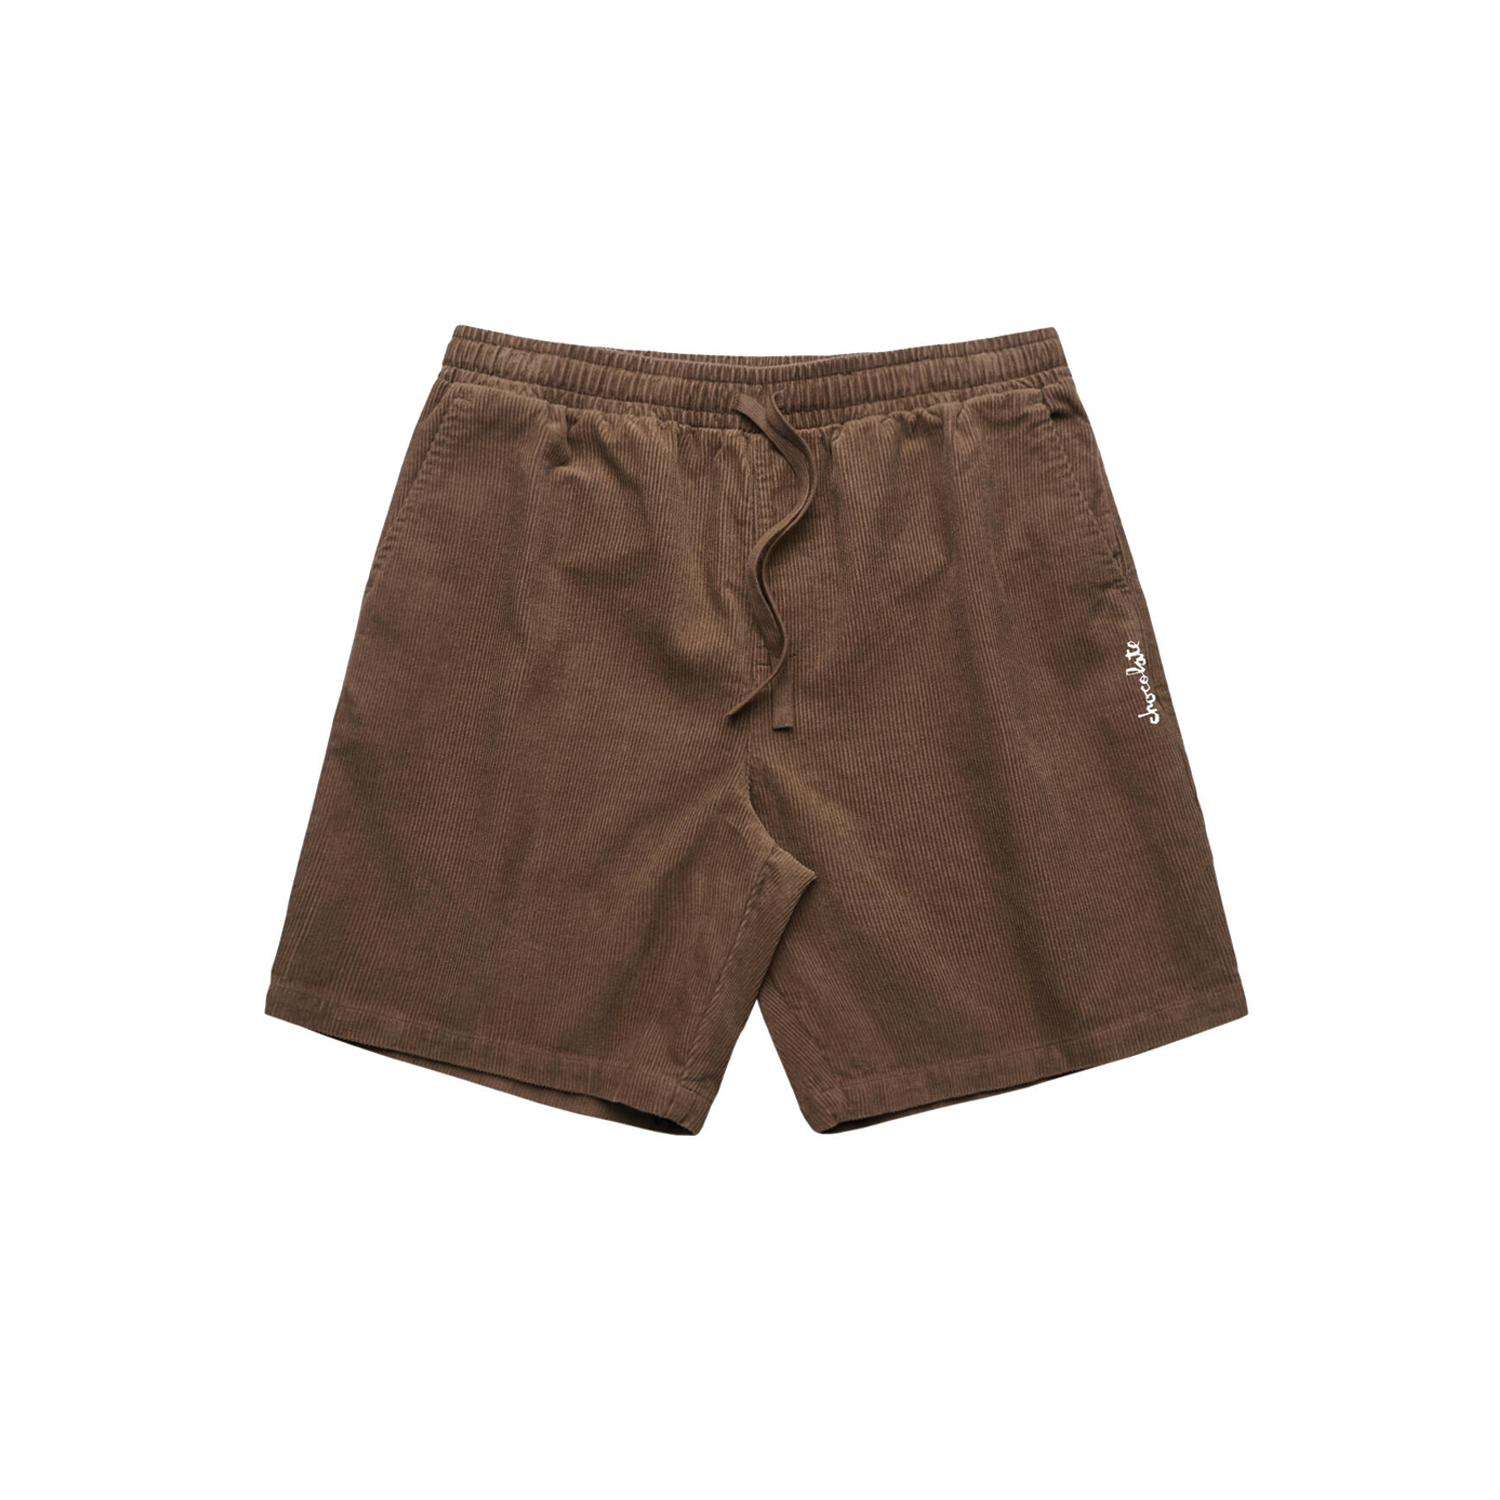 CHOCOLATE SKATEBOARDS - CORD SHORTS - BROWN